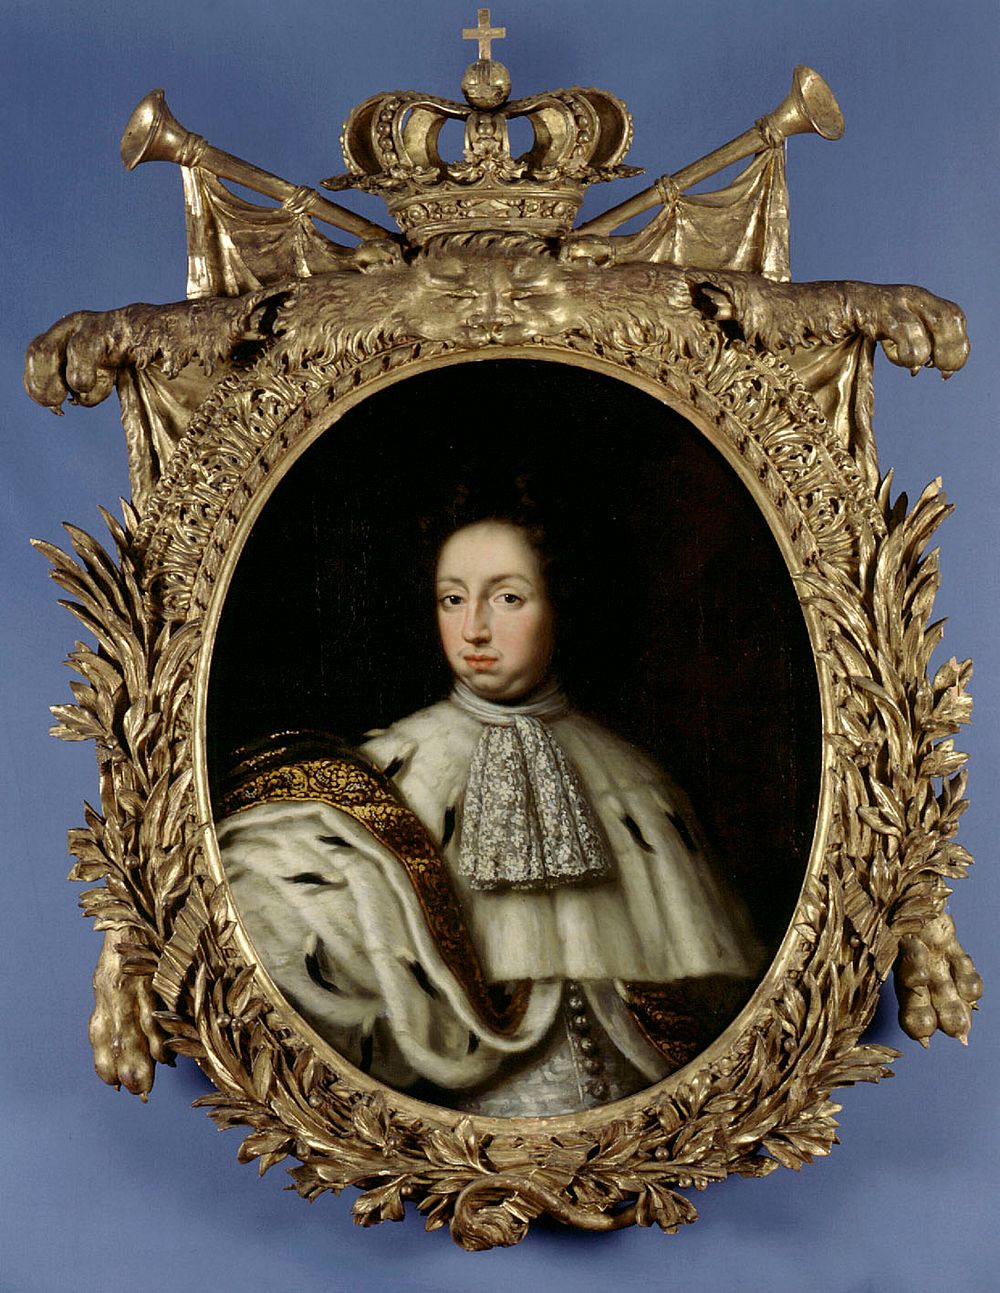 King charles xi of sweden, 1648 - 1698